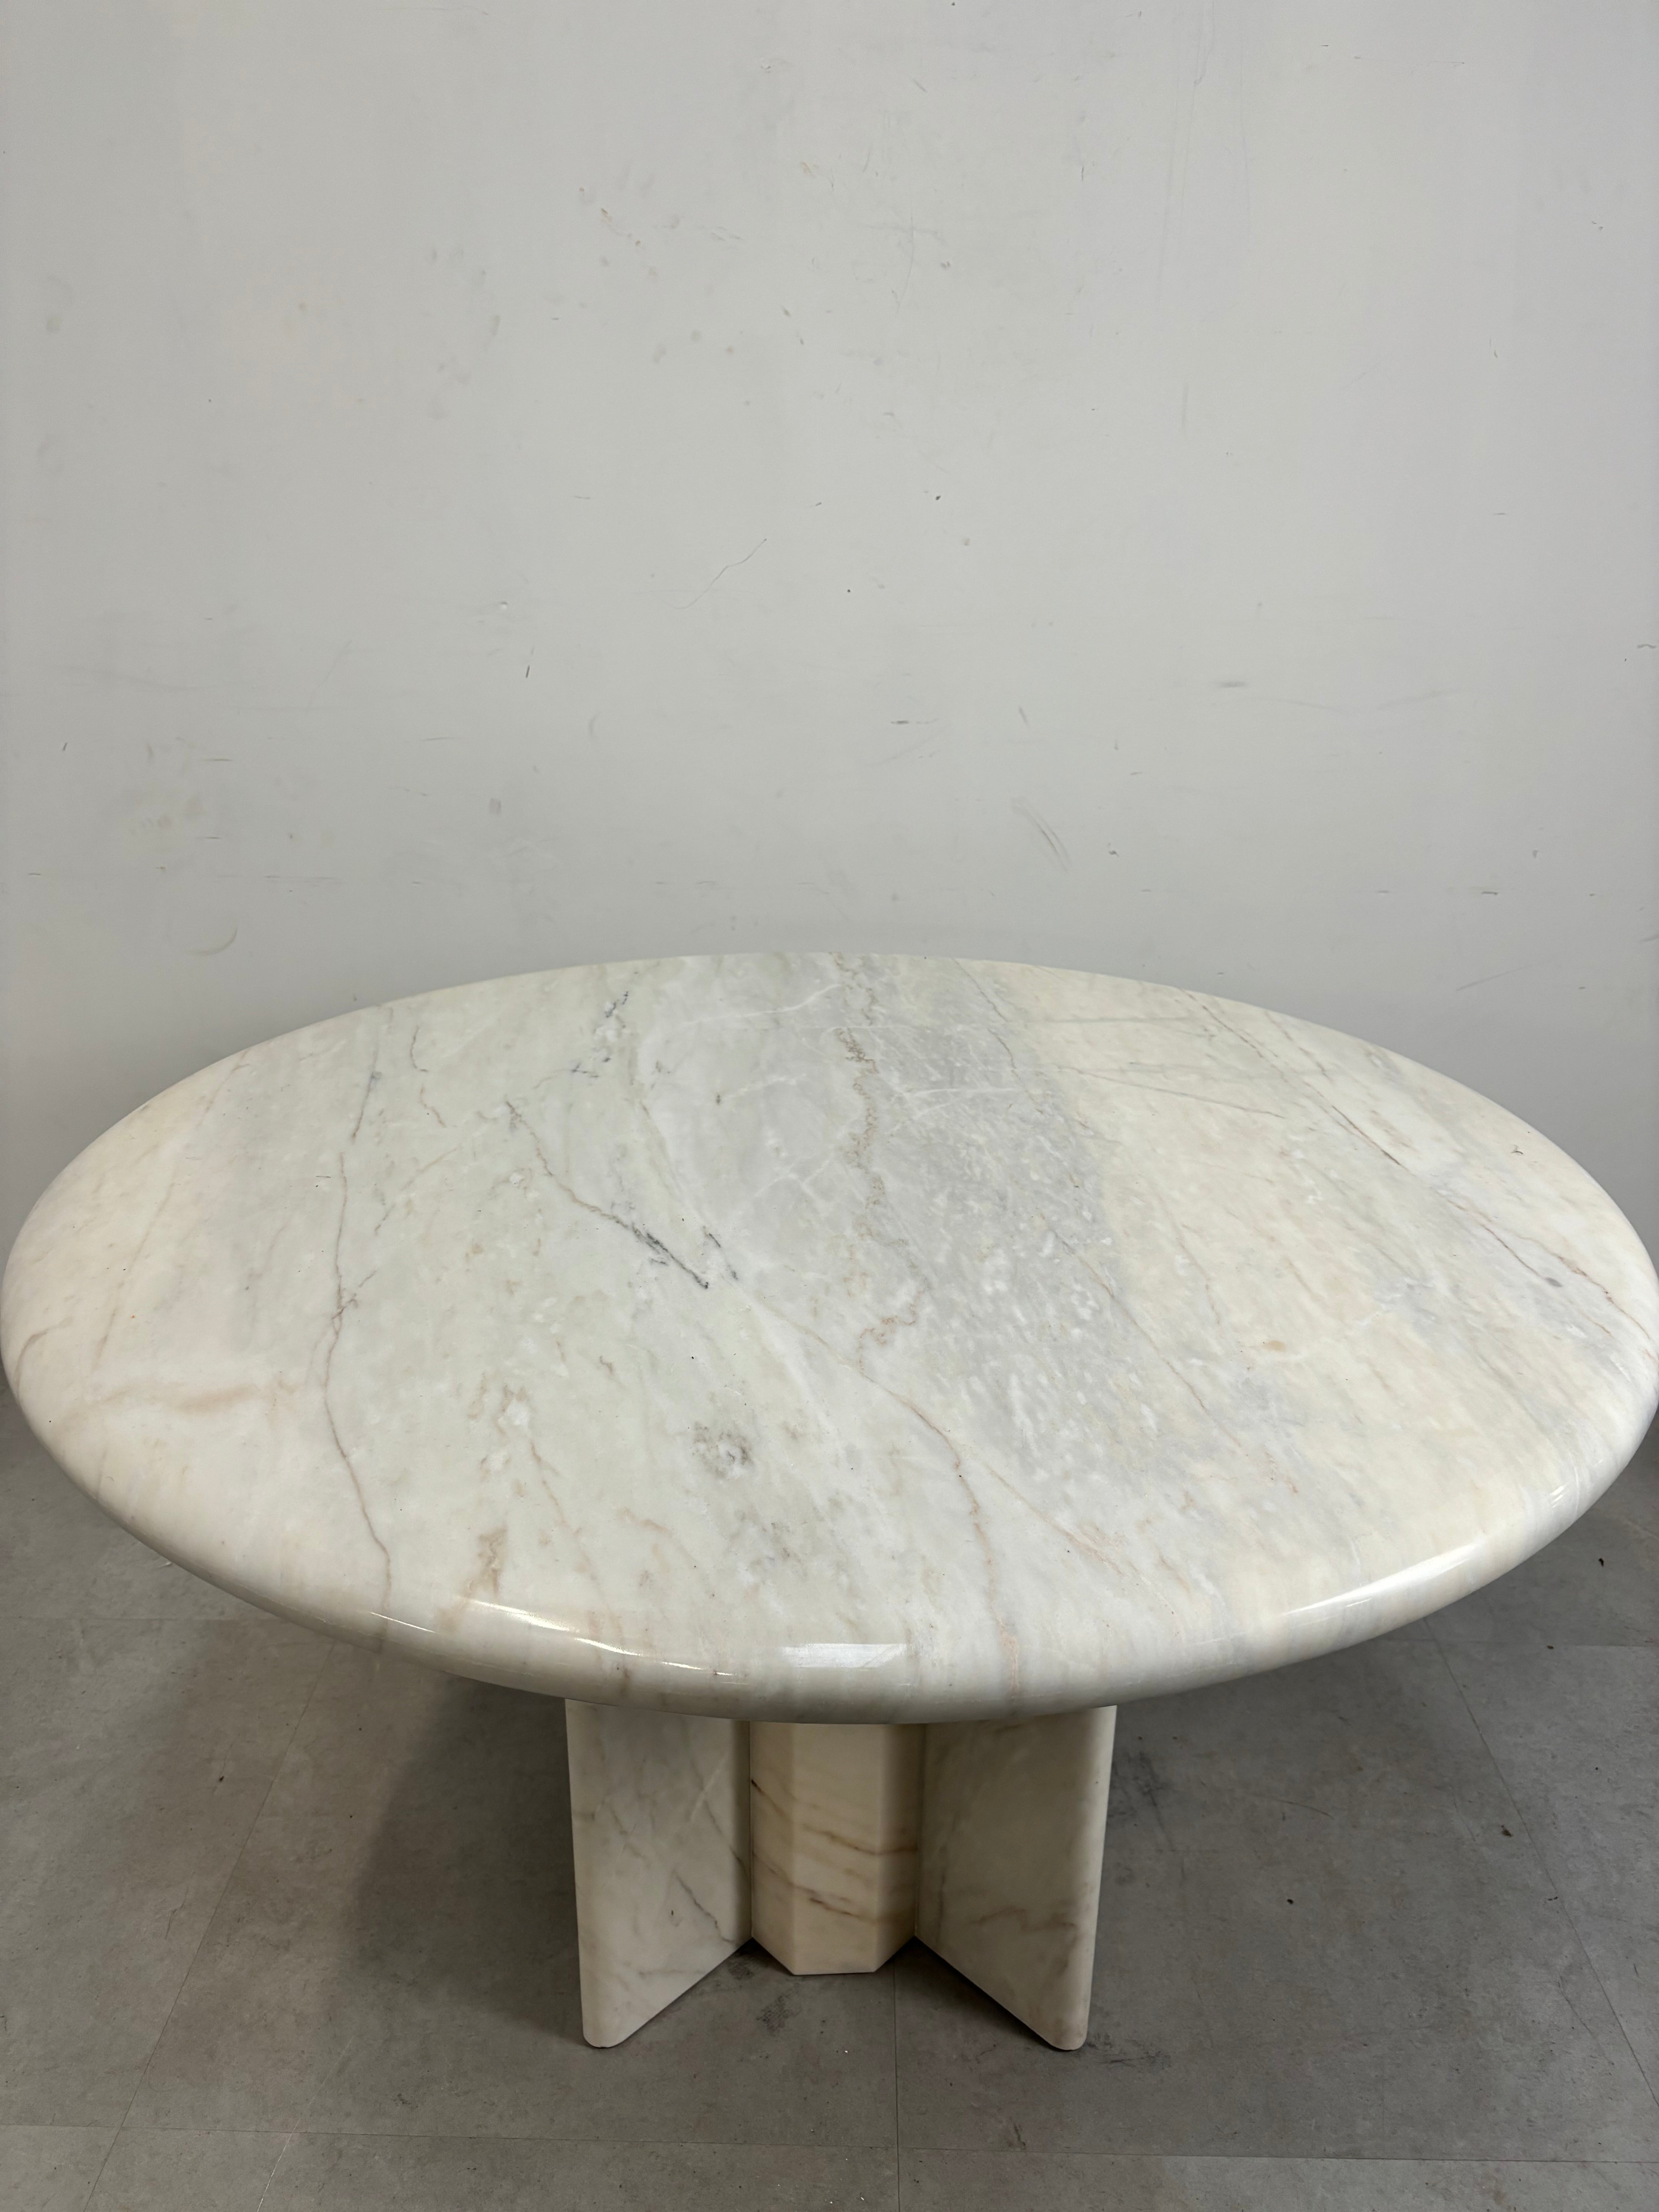 Round 1980’s Marble Dining Table